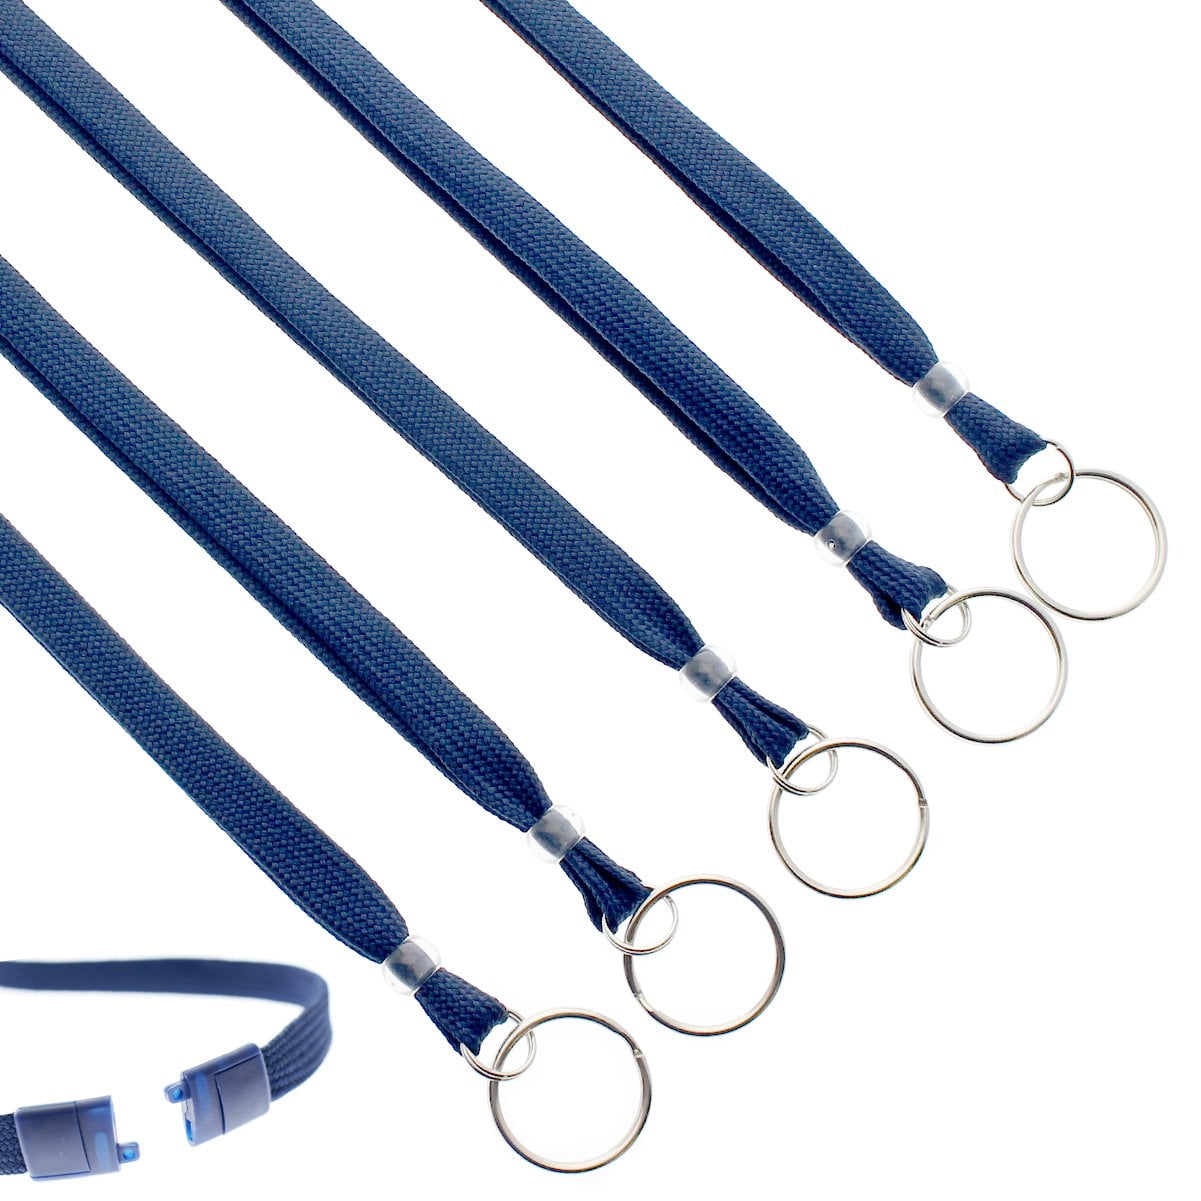 Football Team Fans Long Lanyard with Detachable Buckle Key Ring for Badge/Key/Work id/Mobile Phone and Etc. 